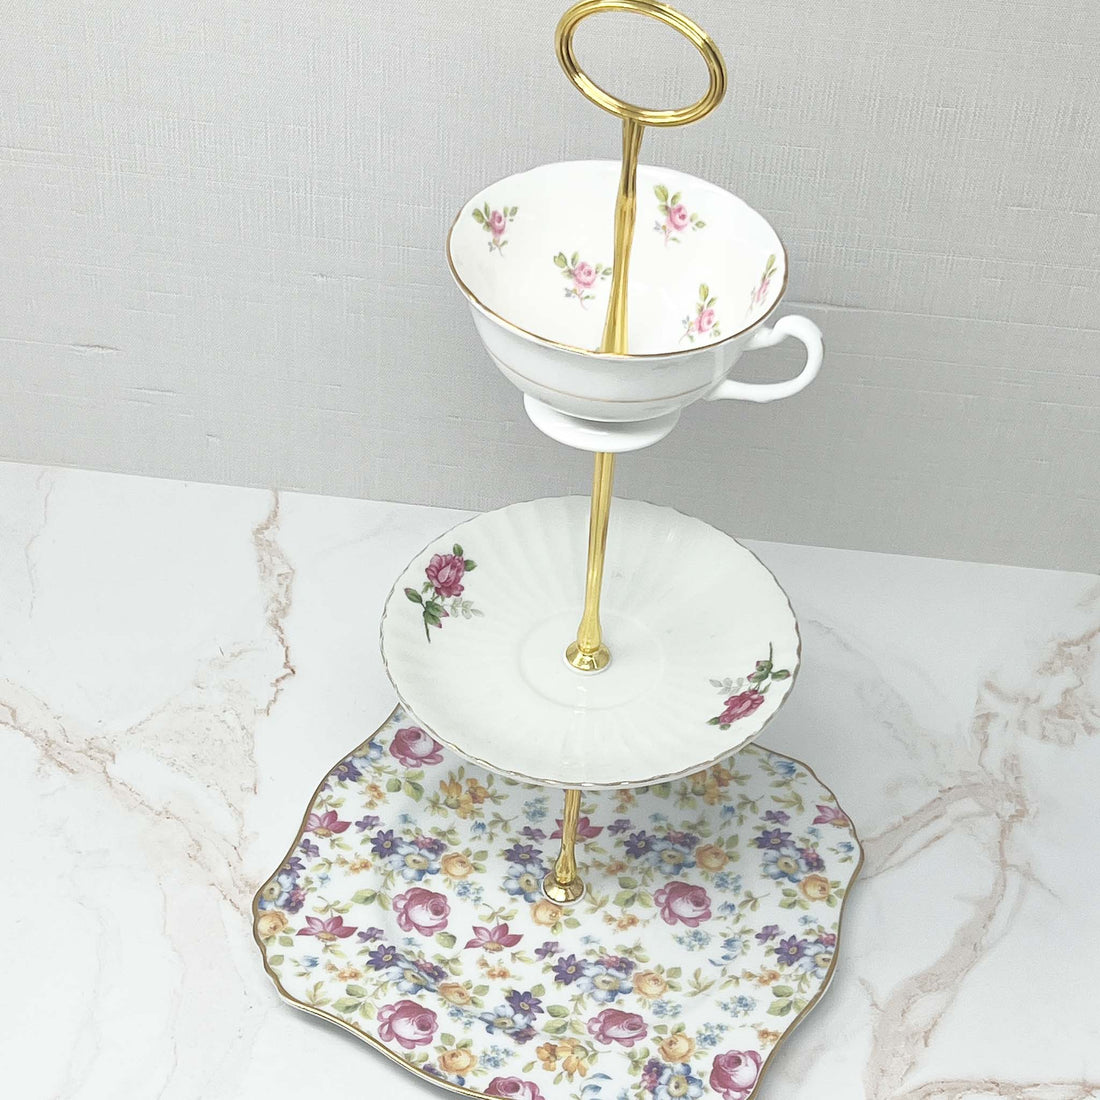 Claudette Square Display Stand | The Brooklyn Teacup - The Brooklyn Teacup